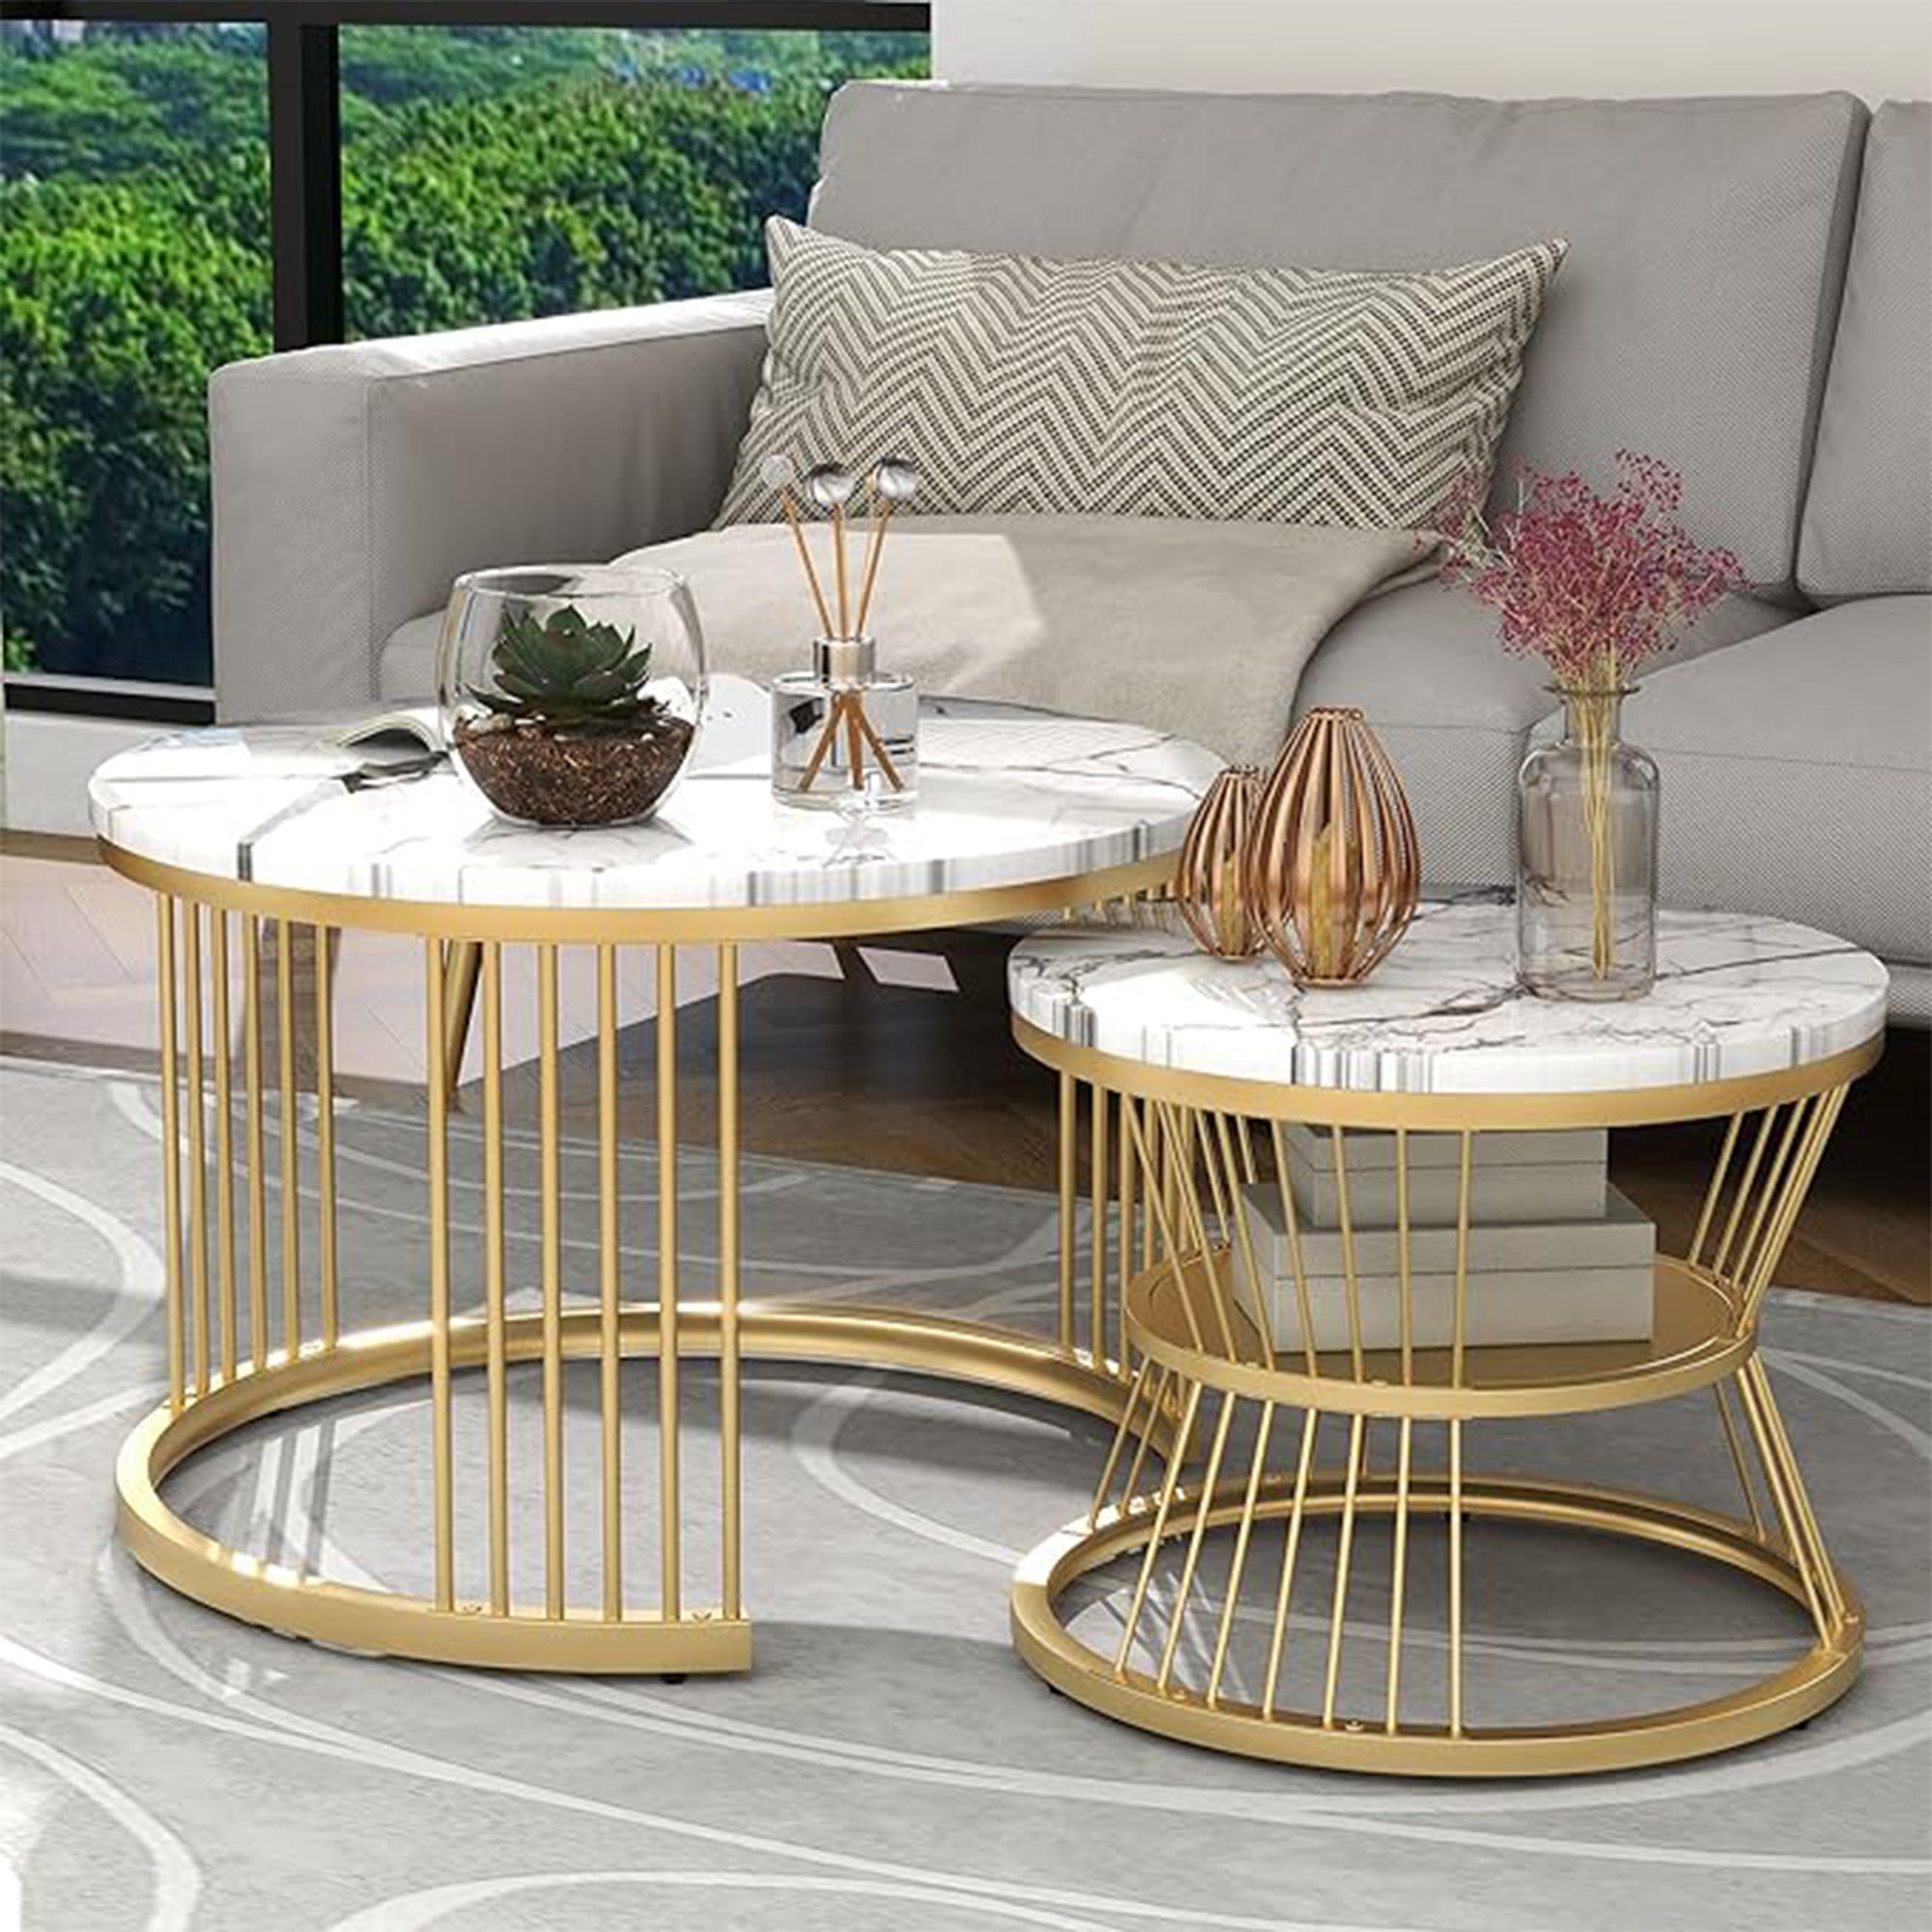 Ornate Round Golden Coffee Table (Set of 2)